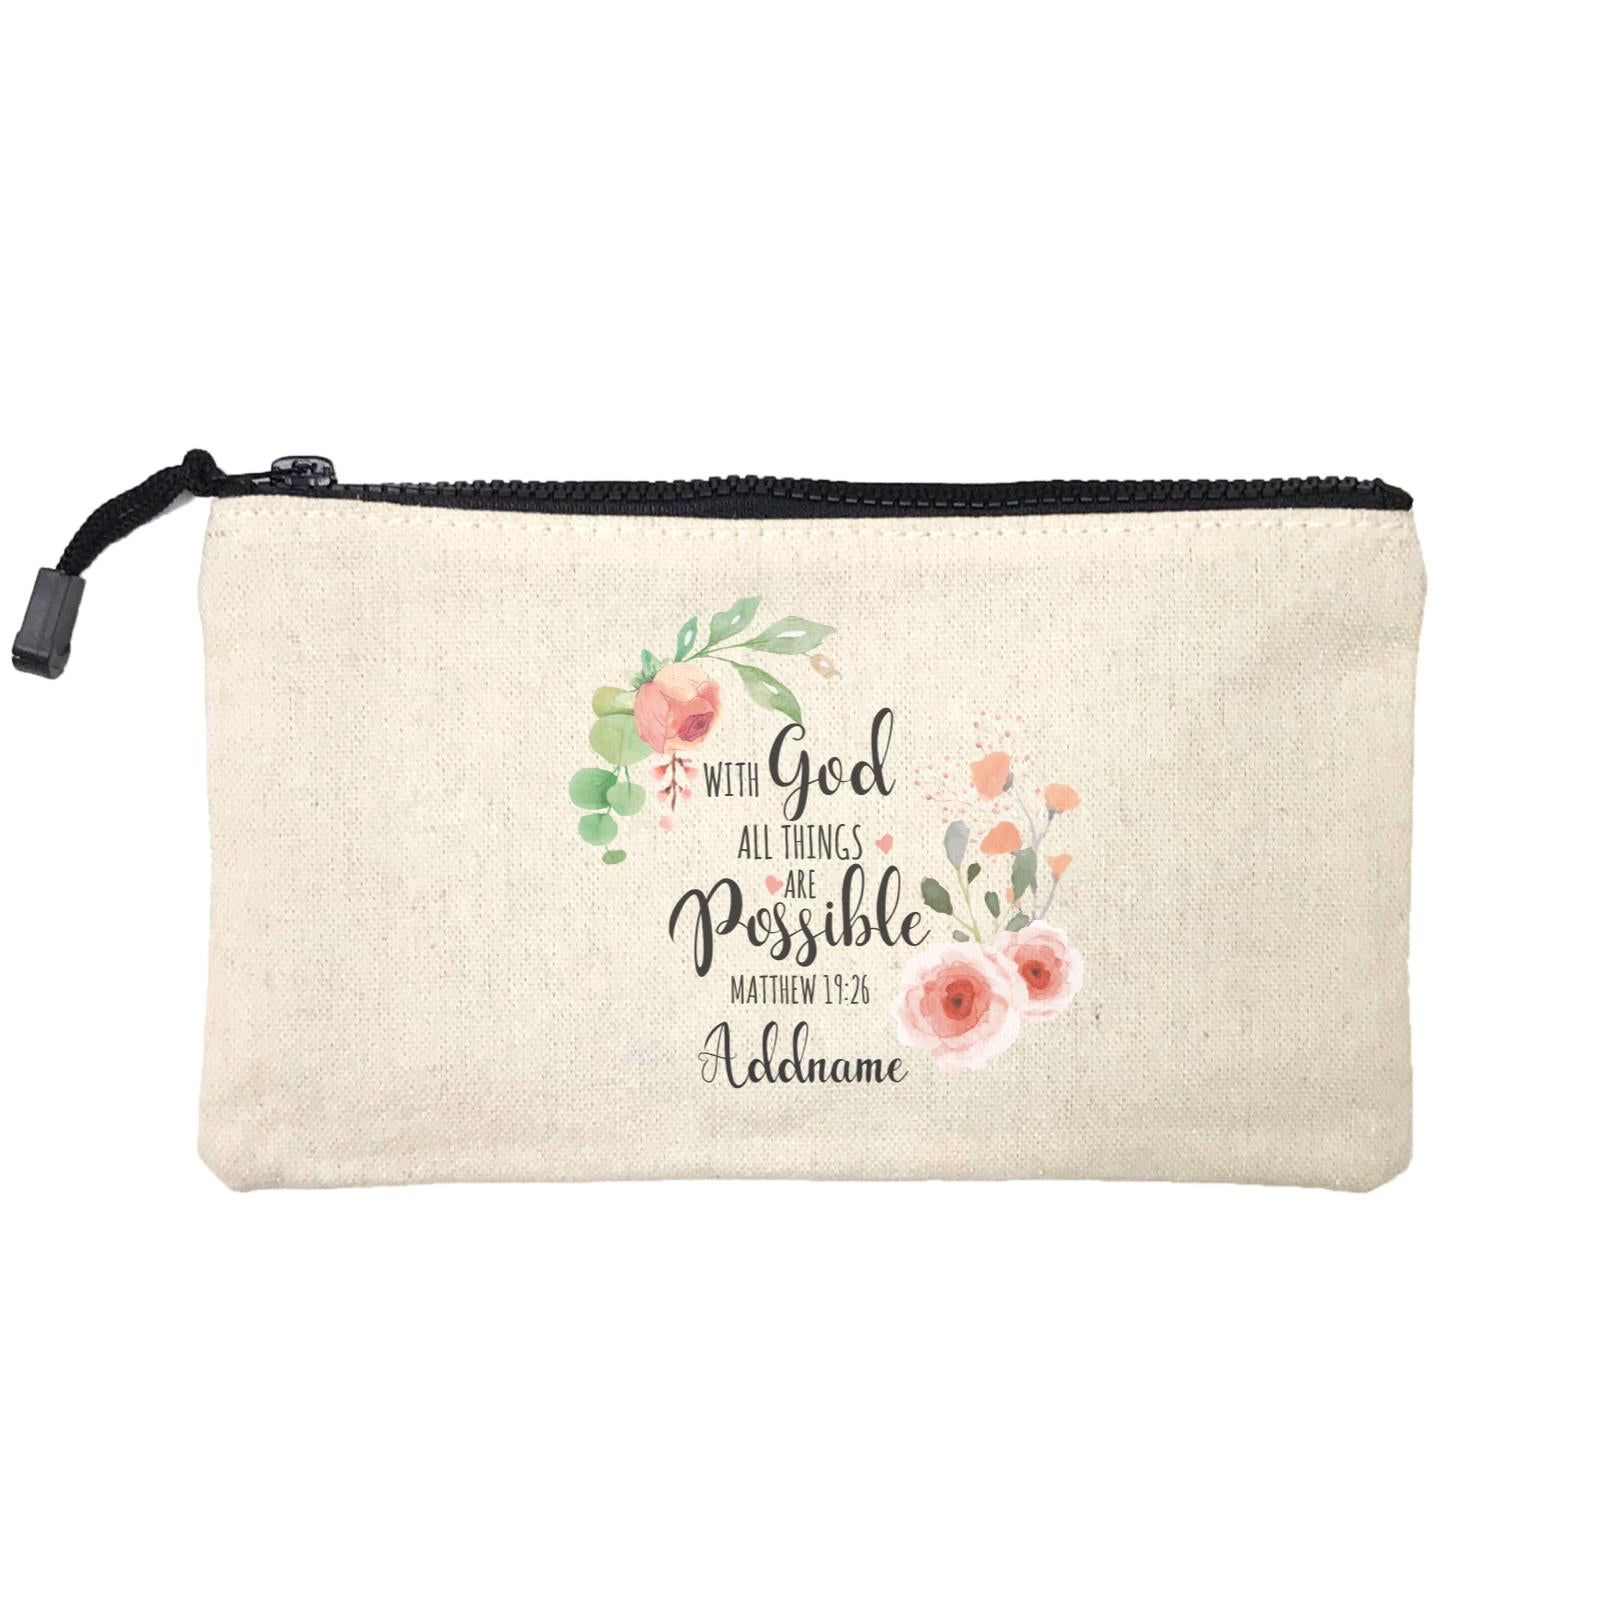 Gods Gift With God All Things Are Possible Matthew 19.26 Addname Mini Accessories Stationery Pouch